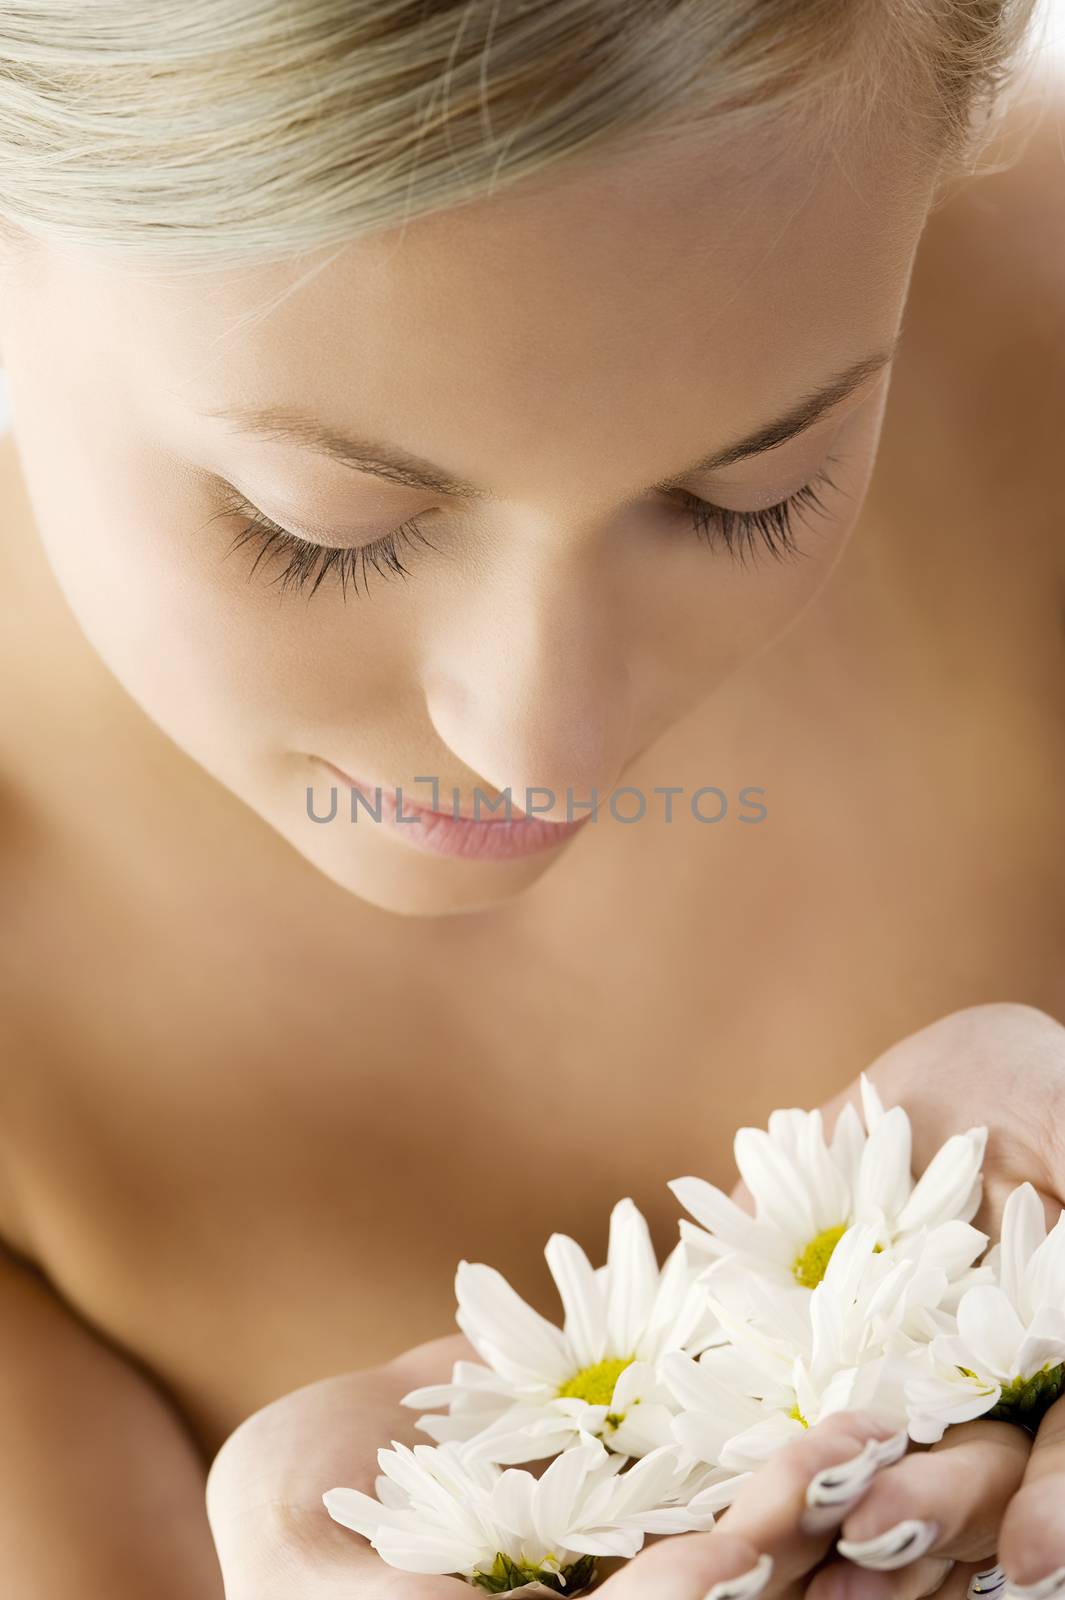 beauty portrait of a beautiful woman with twist braid and some white daisy